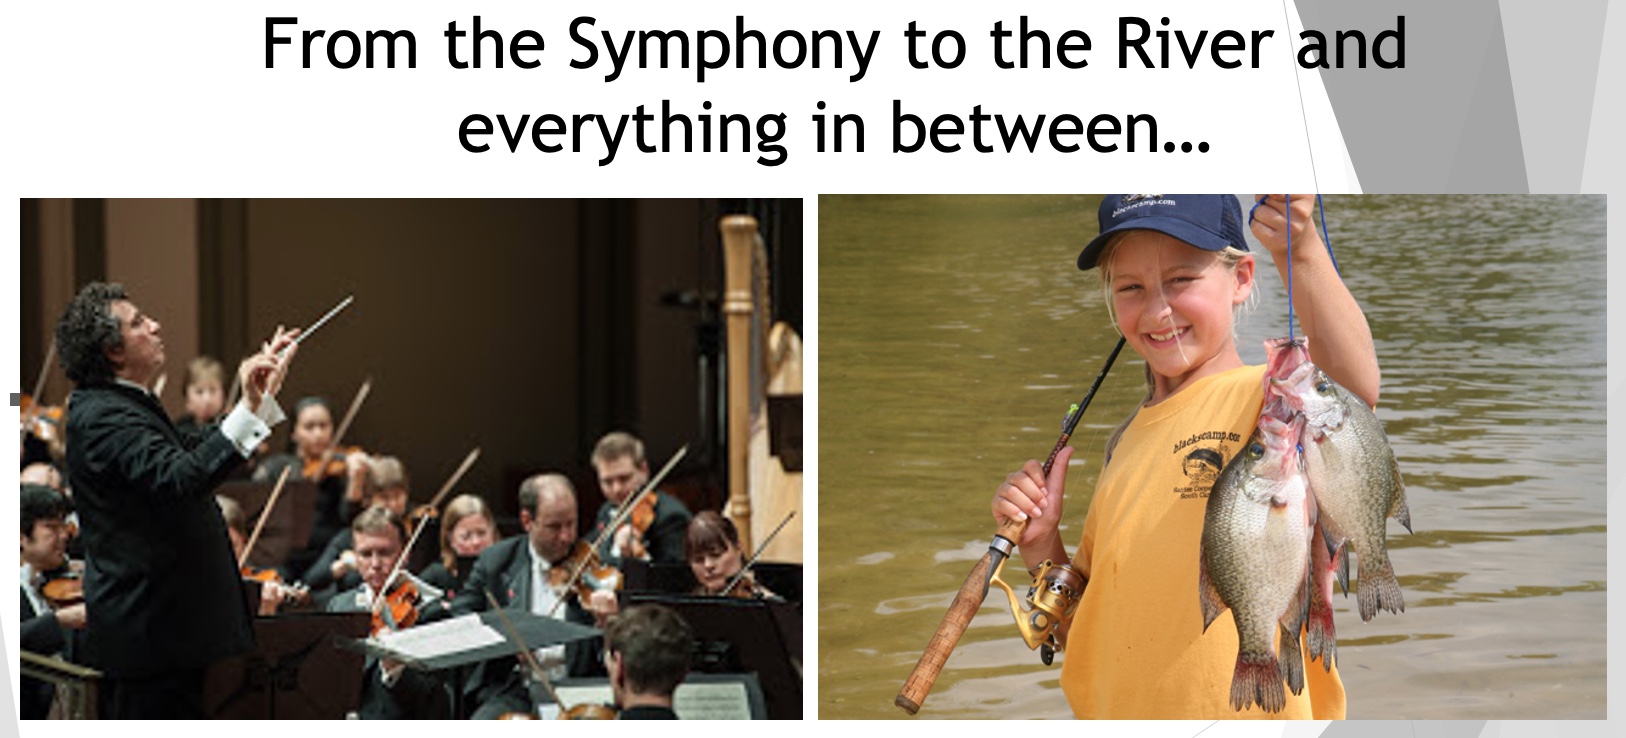 From the symphony to the river and everything in between.. Photos of concert conductor and child catching fish